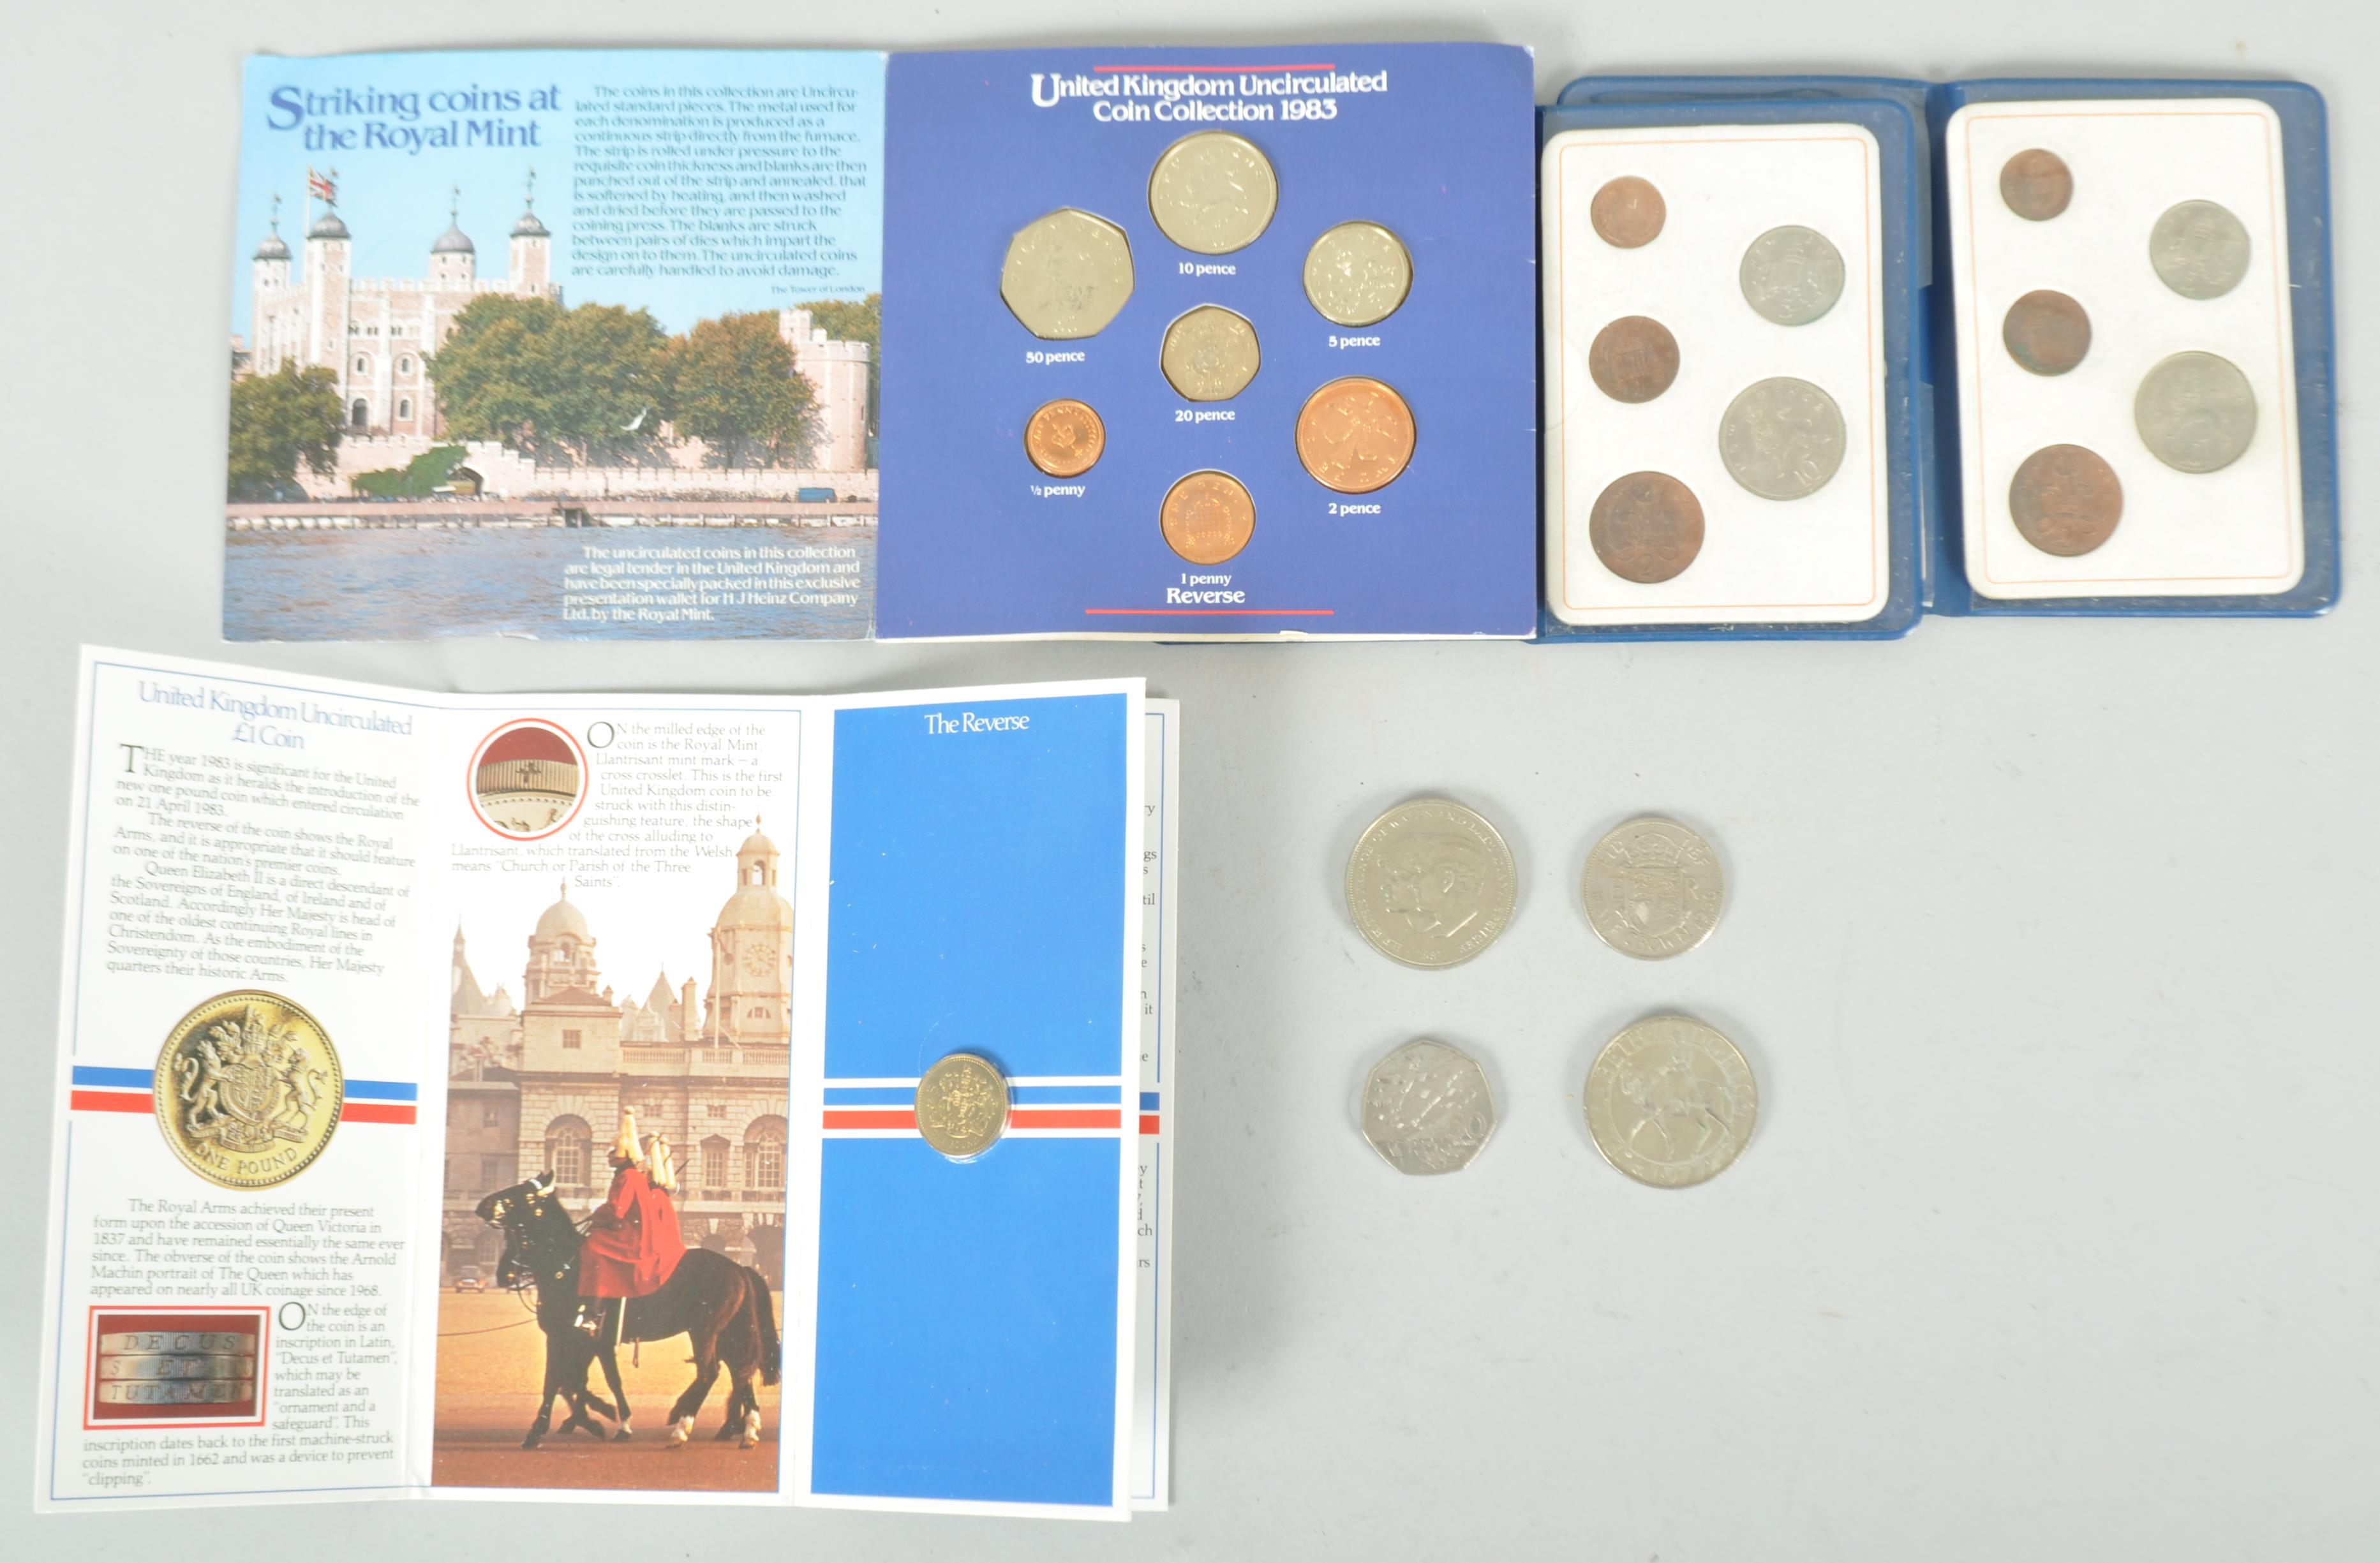 A group of coins, including United Kingdom Uncirculated Coin Collection, 1983,